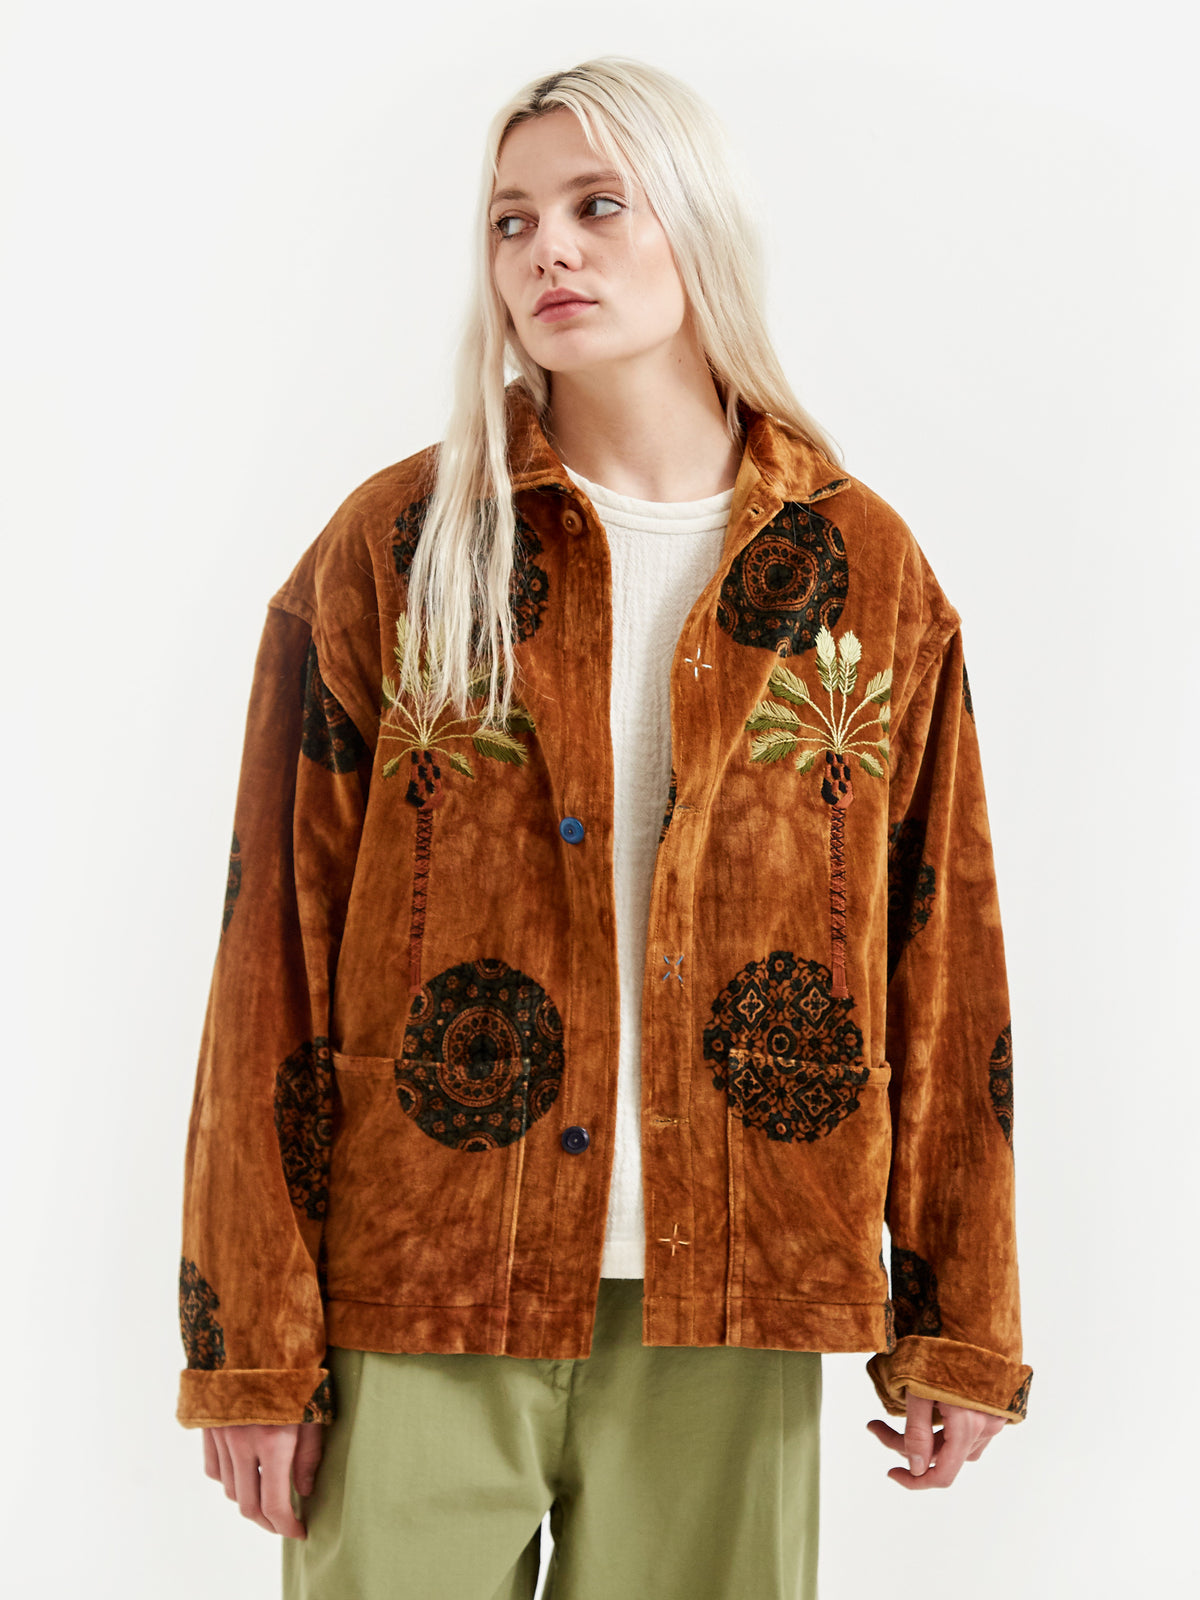 https://www.goodhoodstore.shop/wp-content/uploads/1692/10/our-clearance-offers-a-great-option-to-save-money-while-also-receive-story-mfg-short-on-time-jacket-bark-portal-double-date-story-mfg_0.jpg